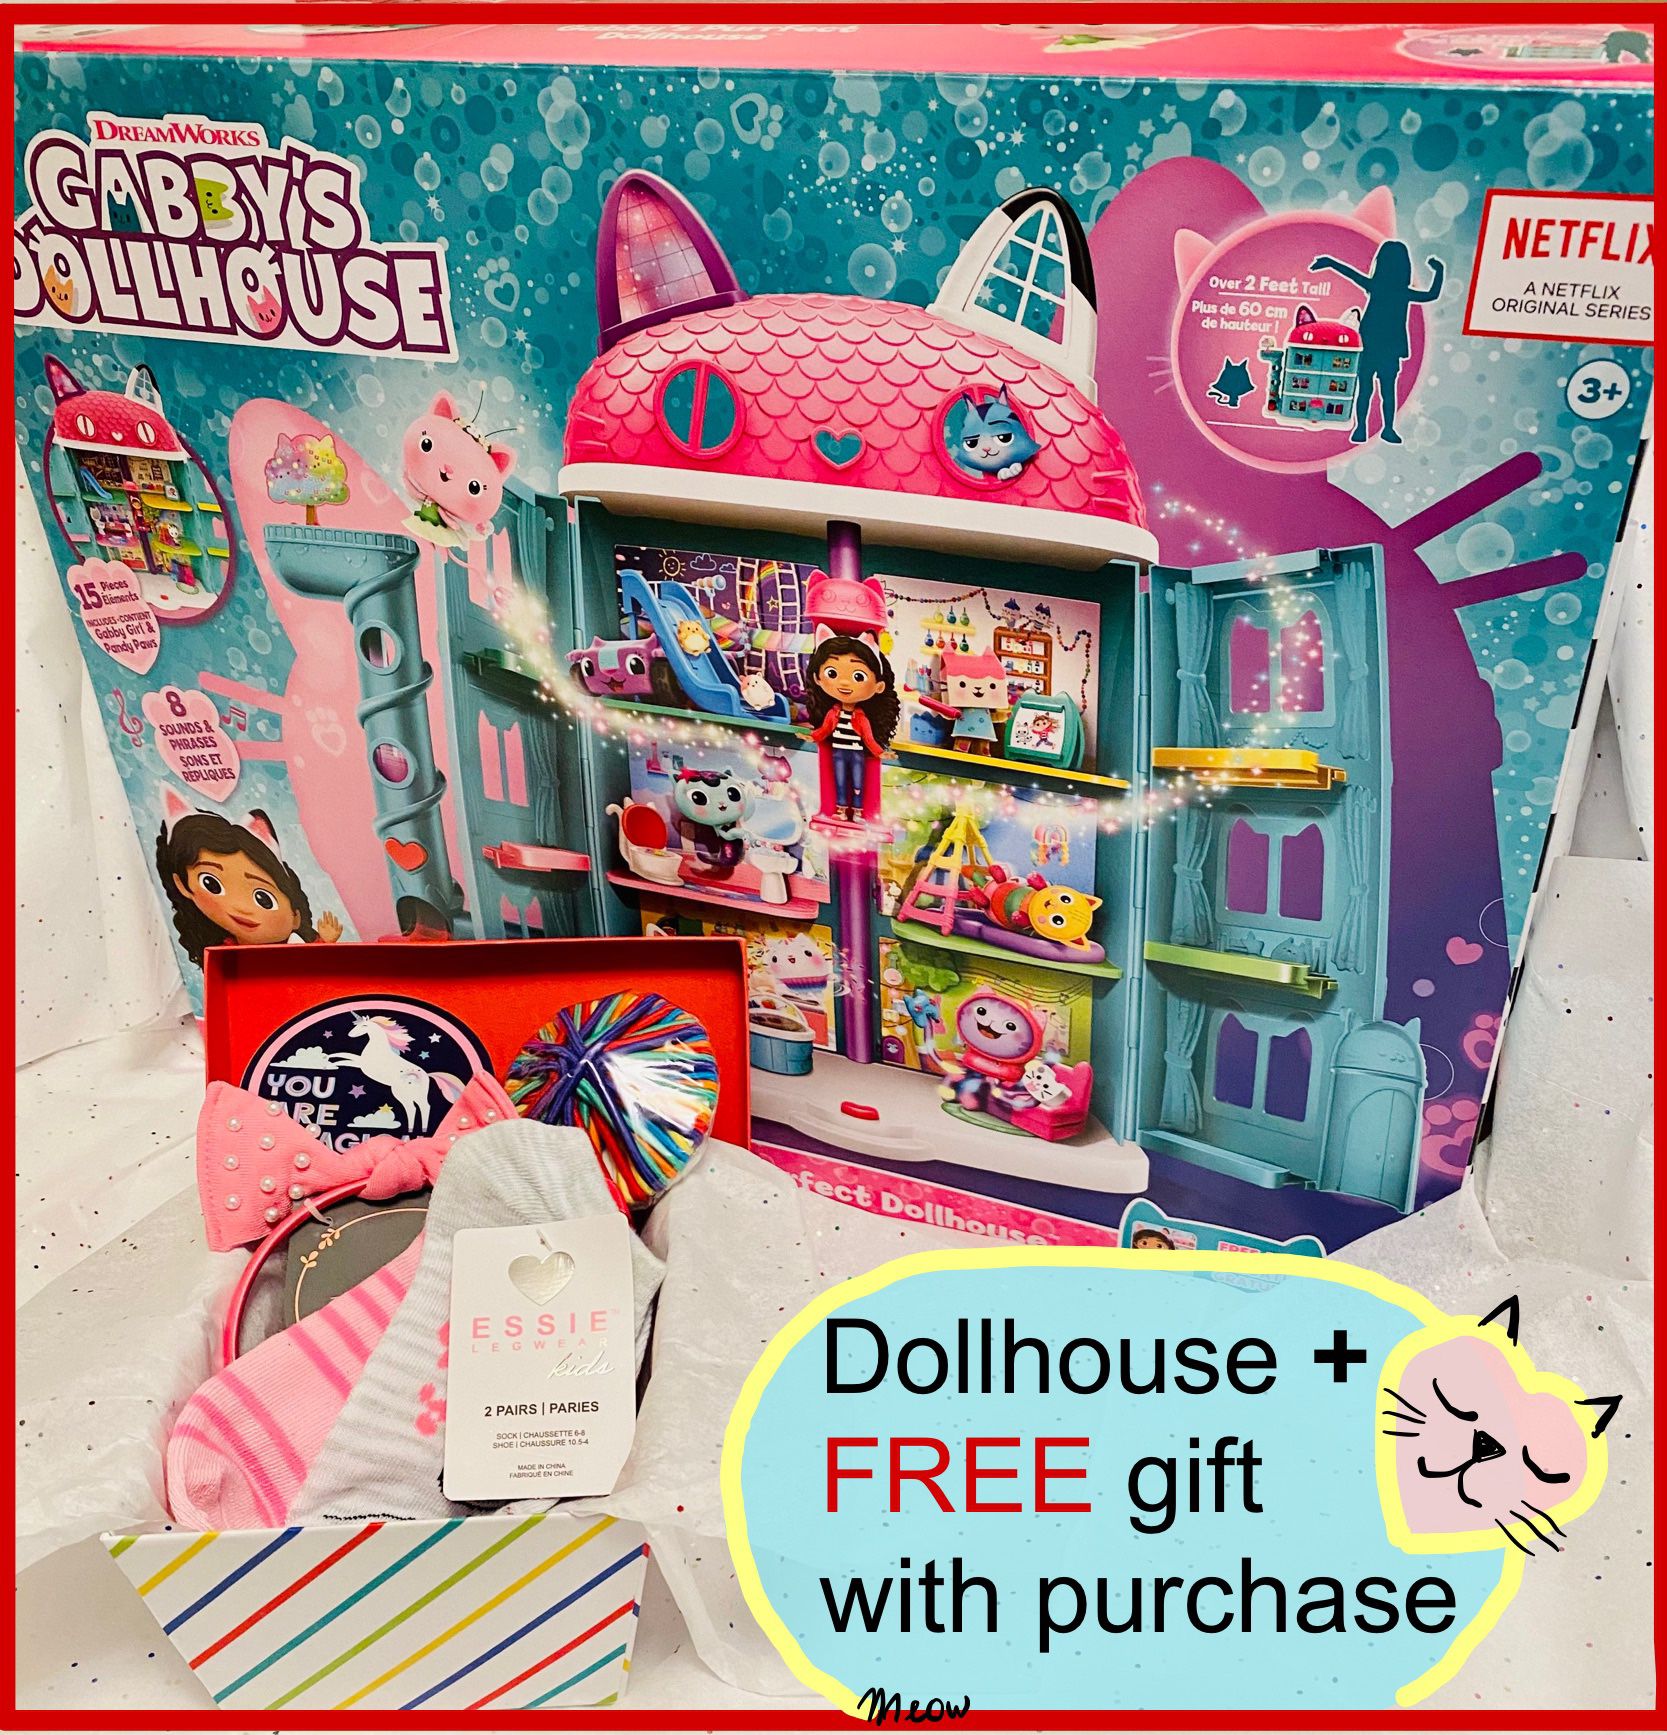 Gabby’s Dollhouse, Puurfect Dollhouse, FREE GIFT